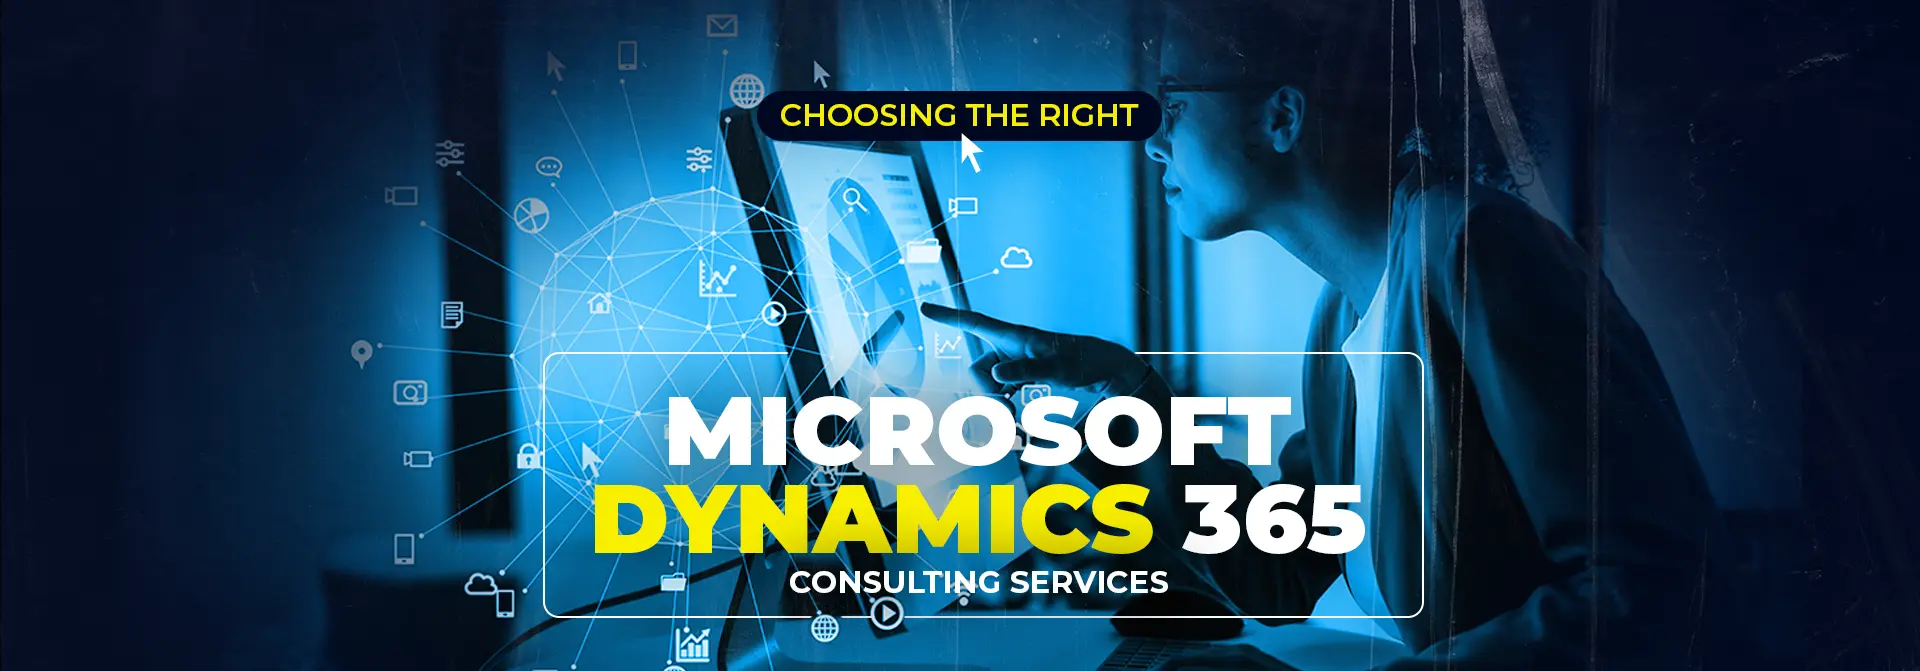 PAC Blog_Choosing the Right Microsoft Dynamics 365 Consulting Services_main banner